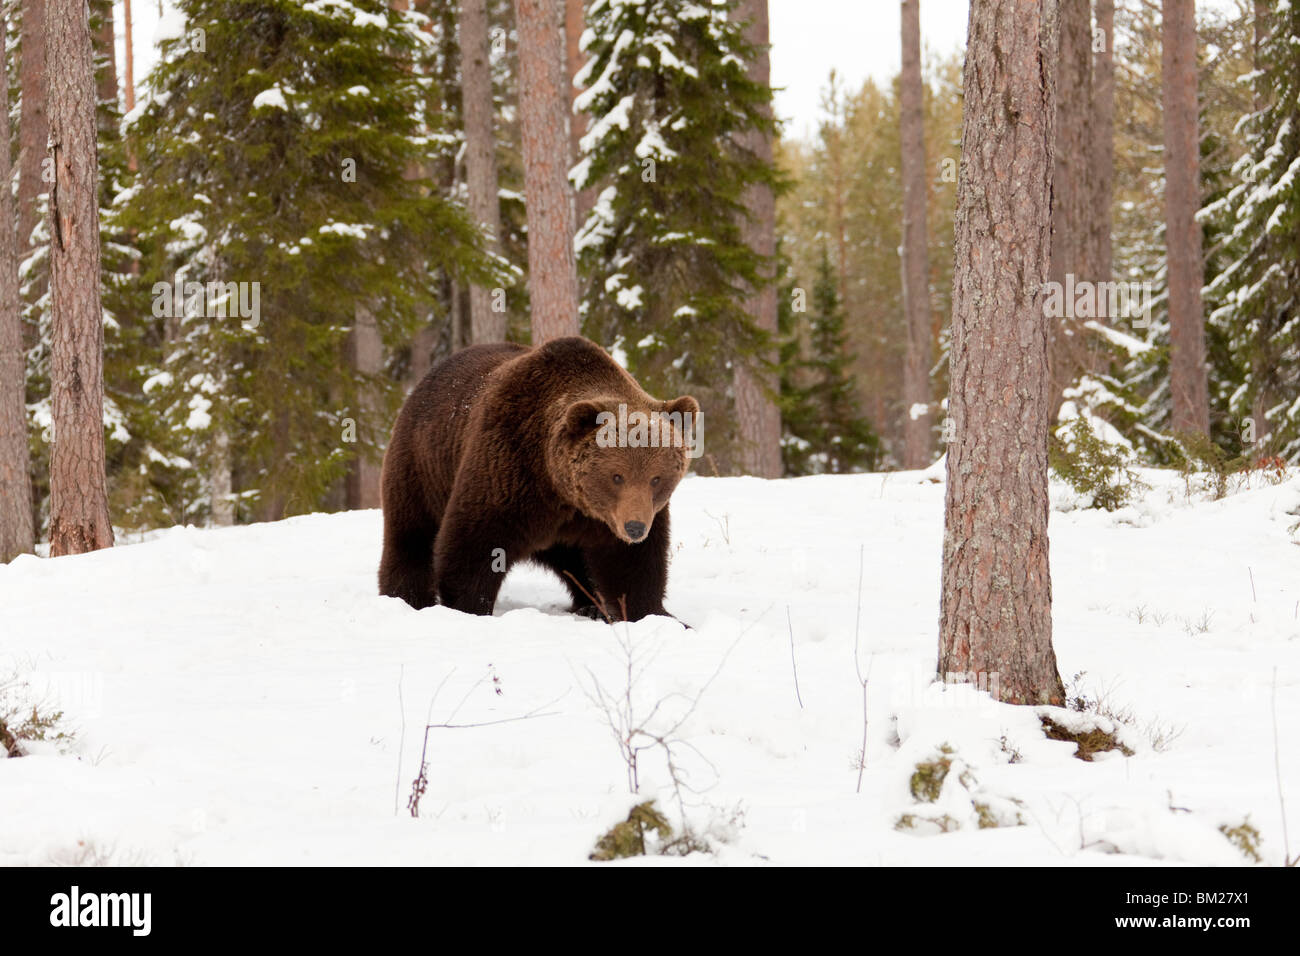 Eurasian brown bear in the snow in Taiga forest. Stock Photo